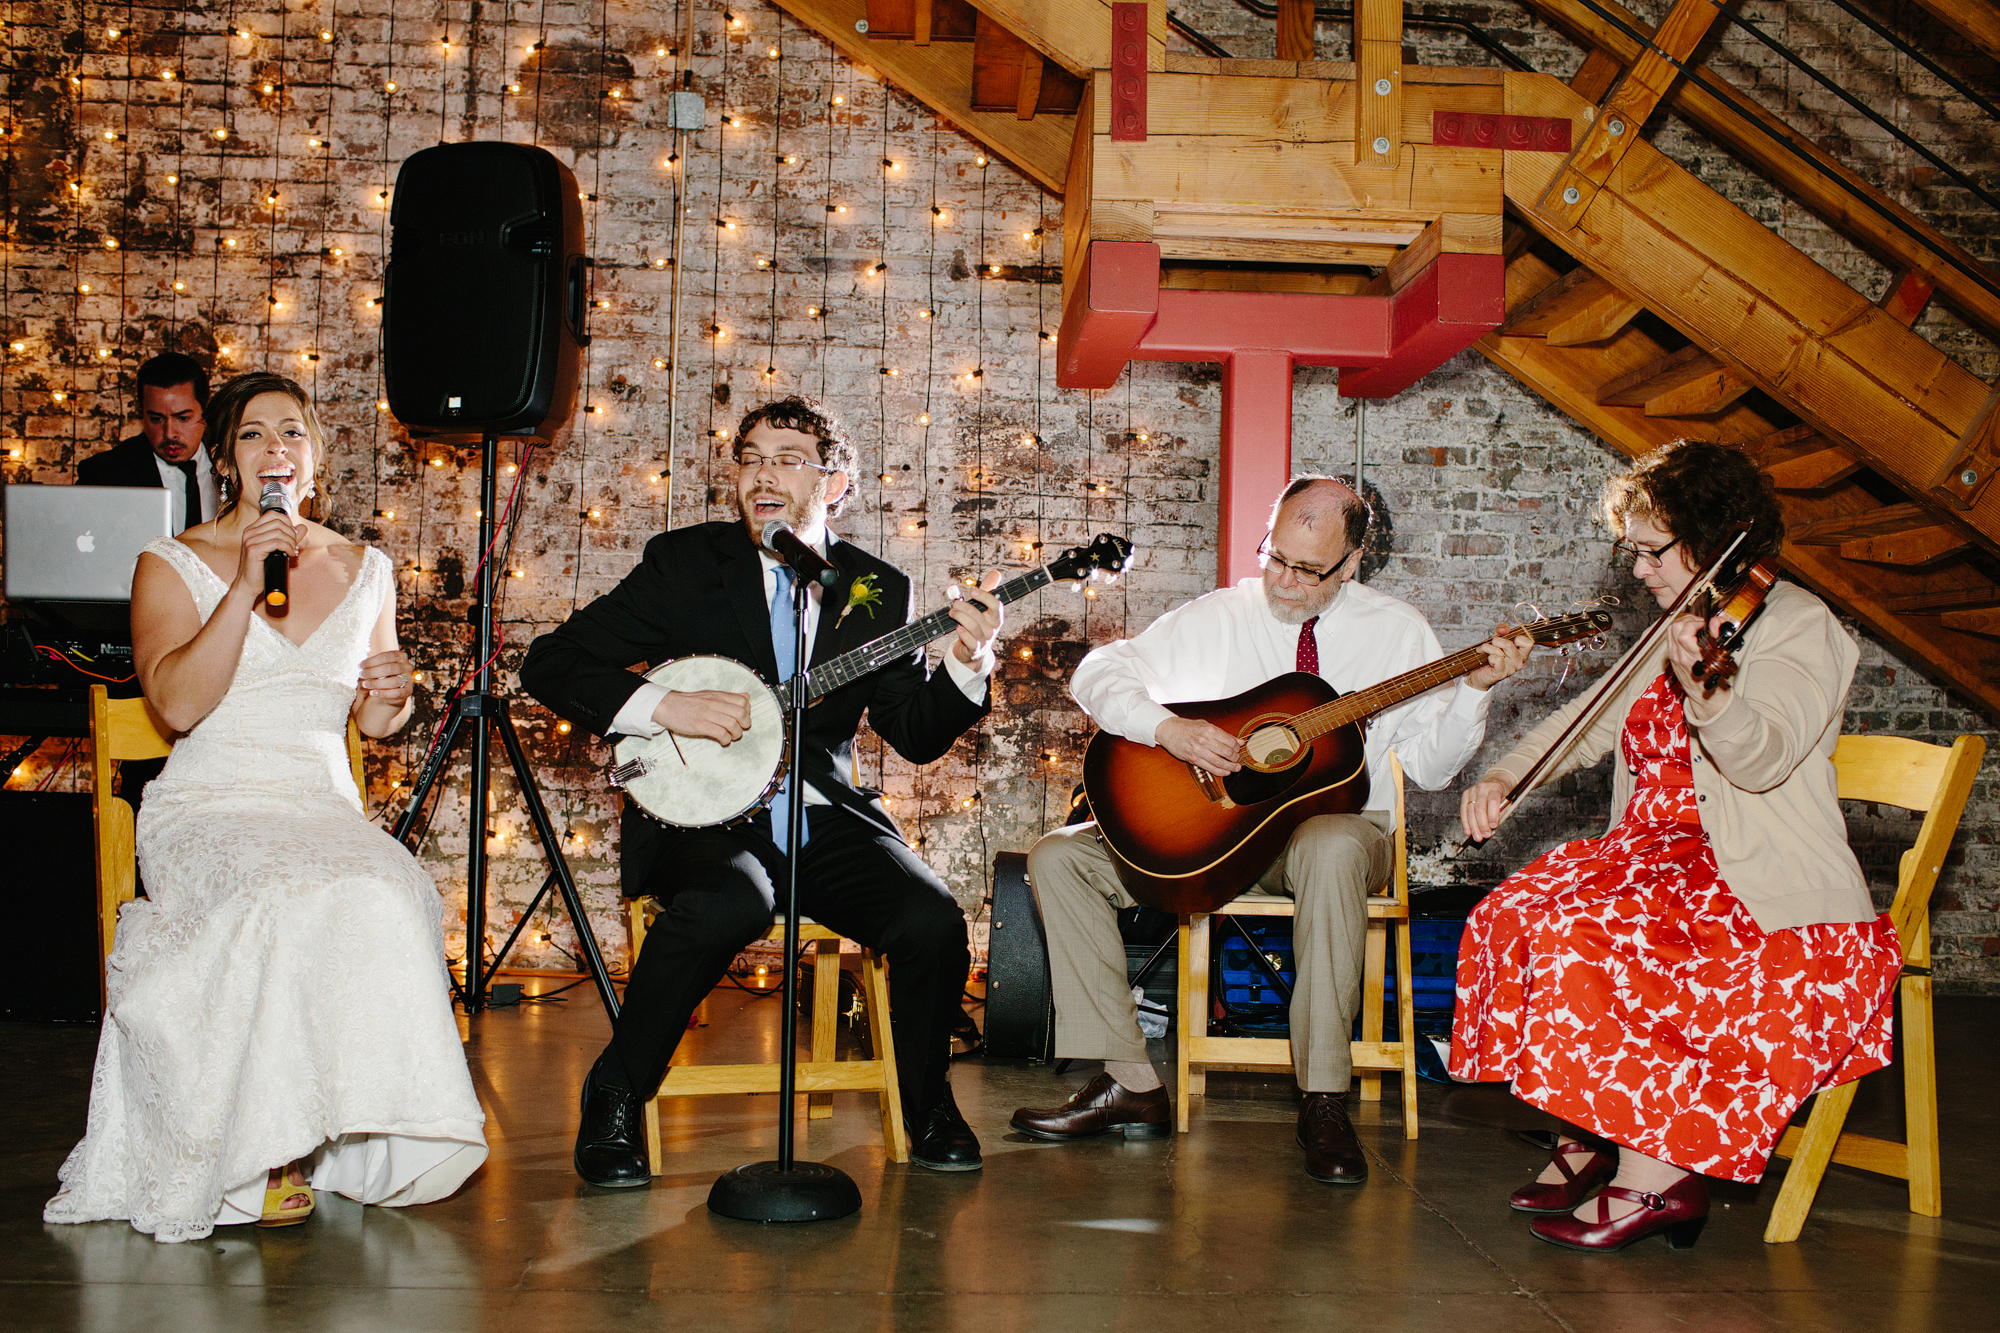 When the couples sing at weddings, they win at life. True story.